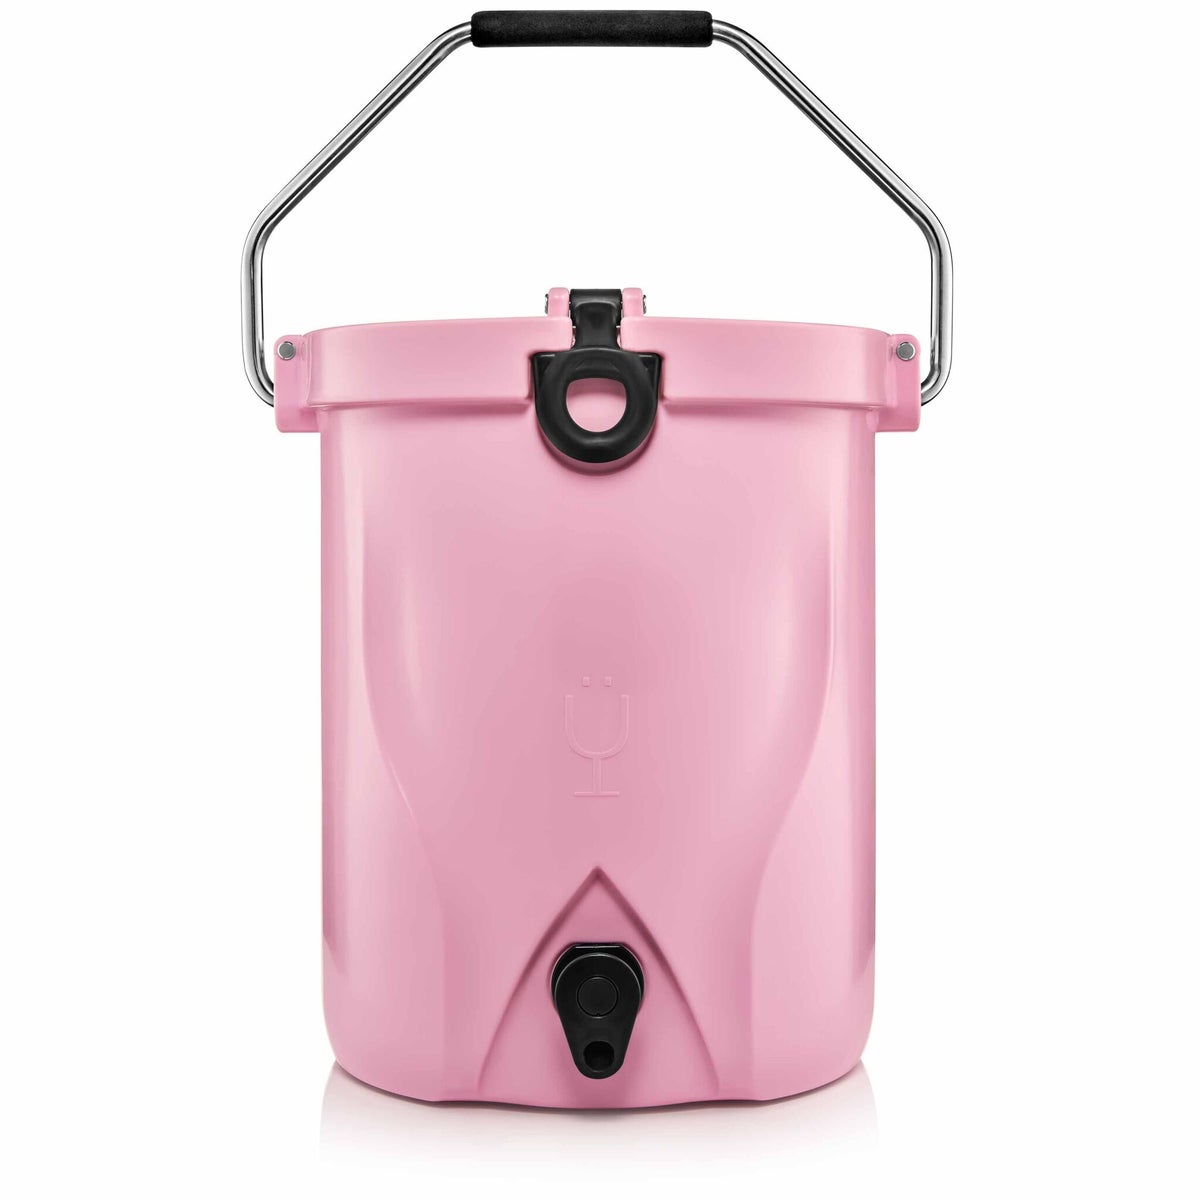 BackTap Rotomolded 3-gallon backpack cooler - Neon Pink